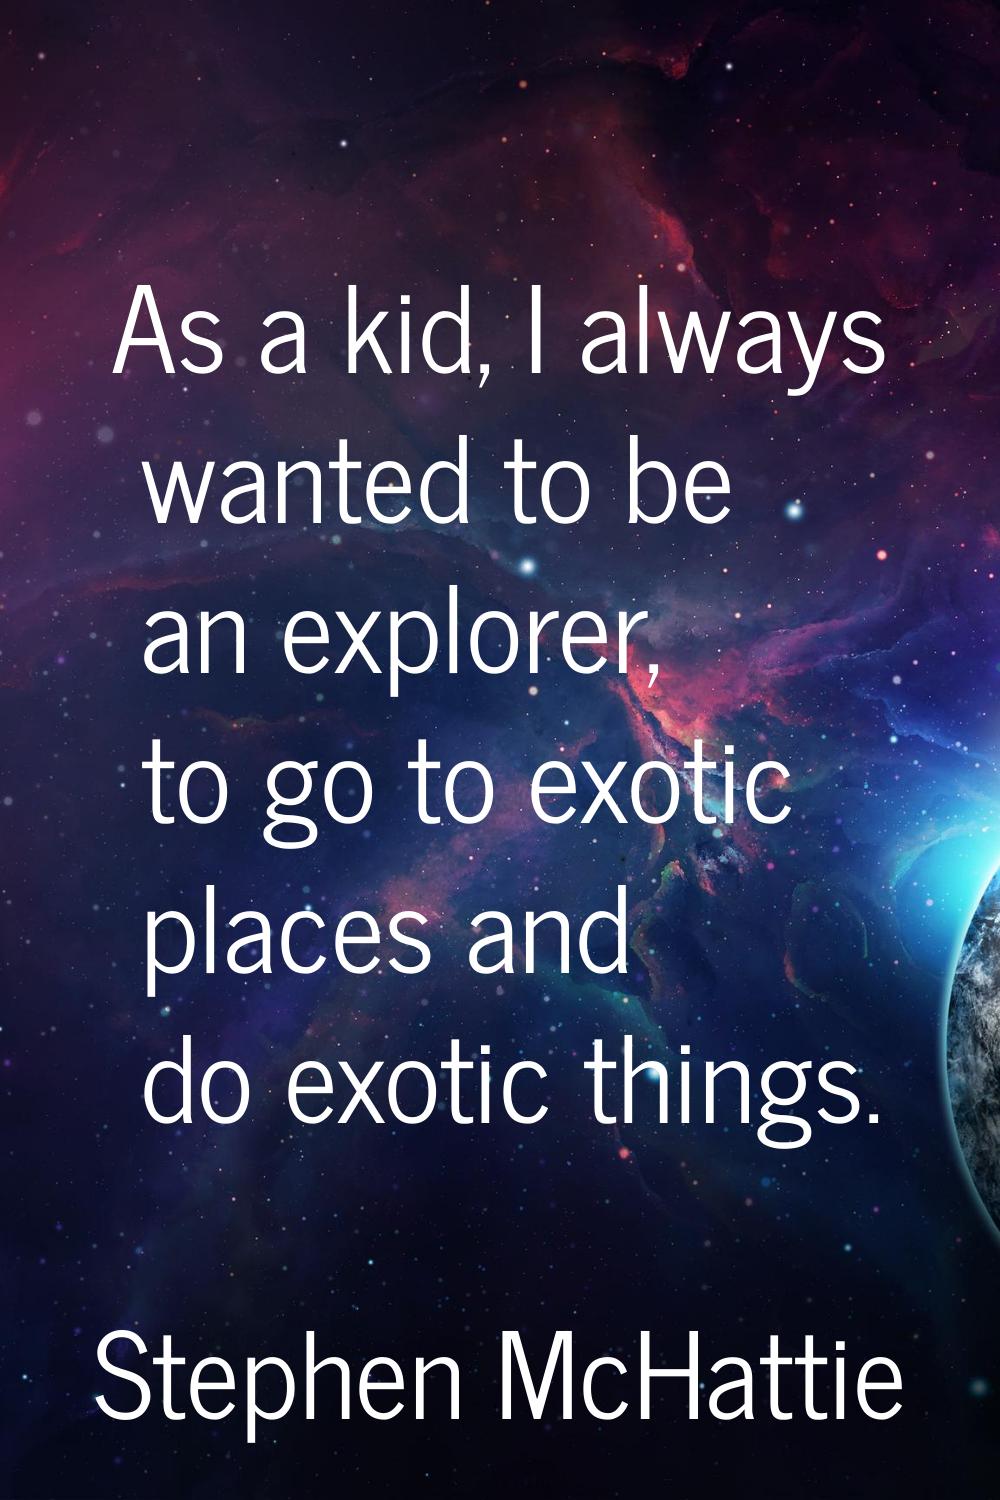 As a kid, I always wanted to be an explorer, to go to exotic places and do exotic things.